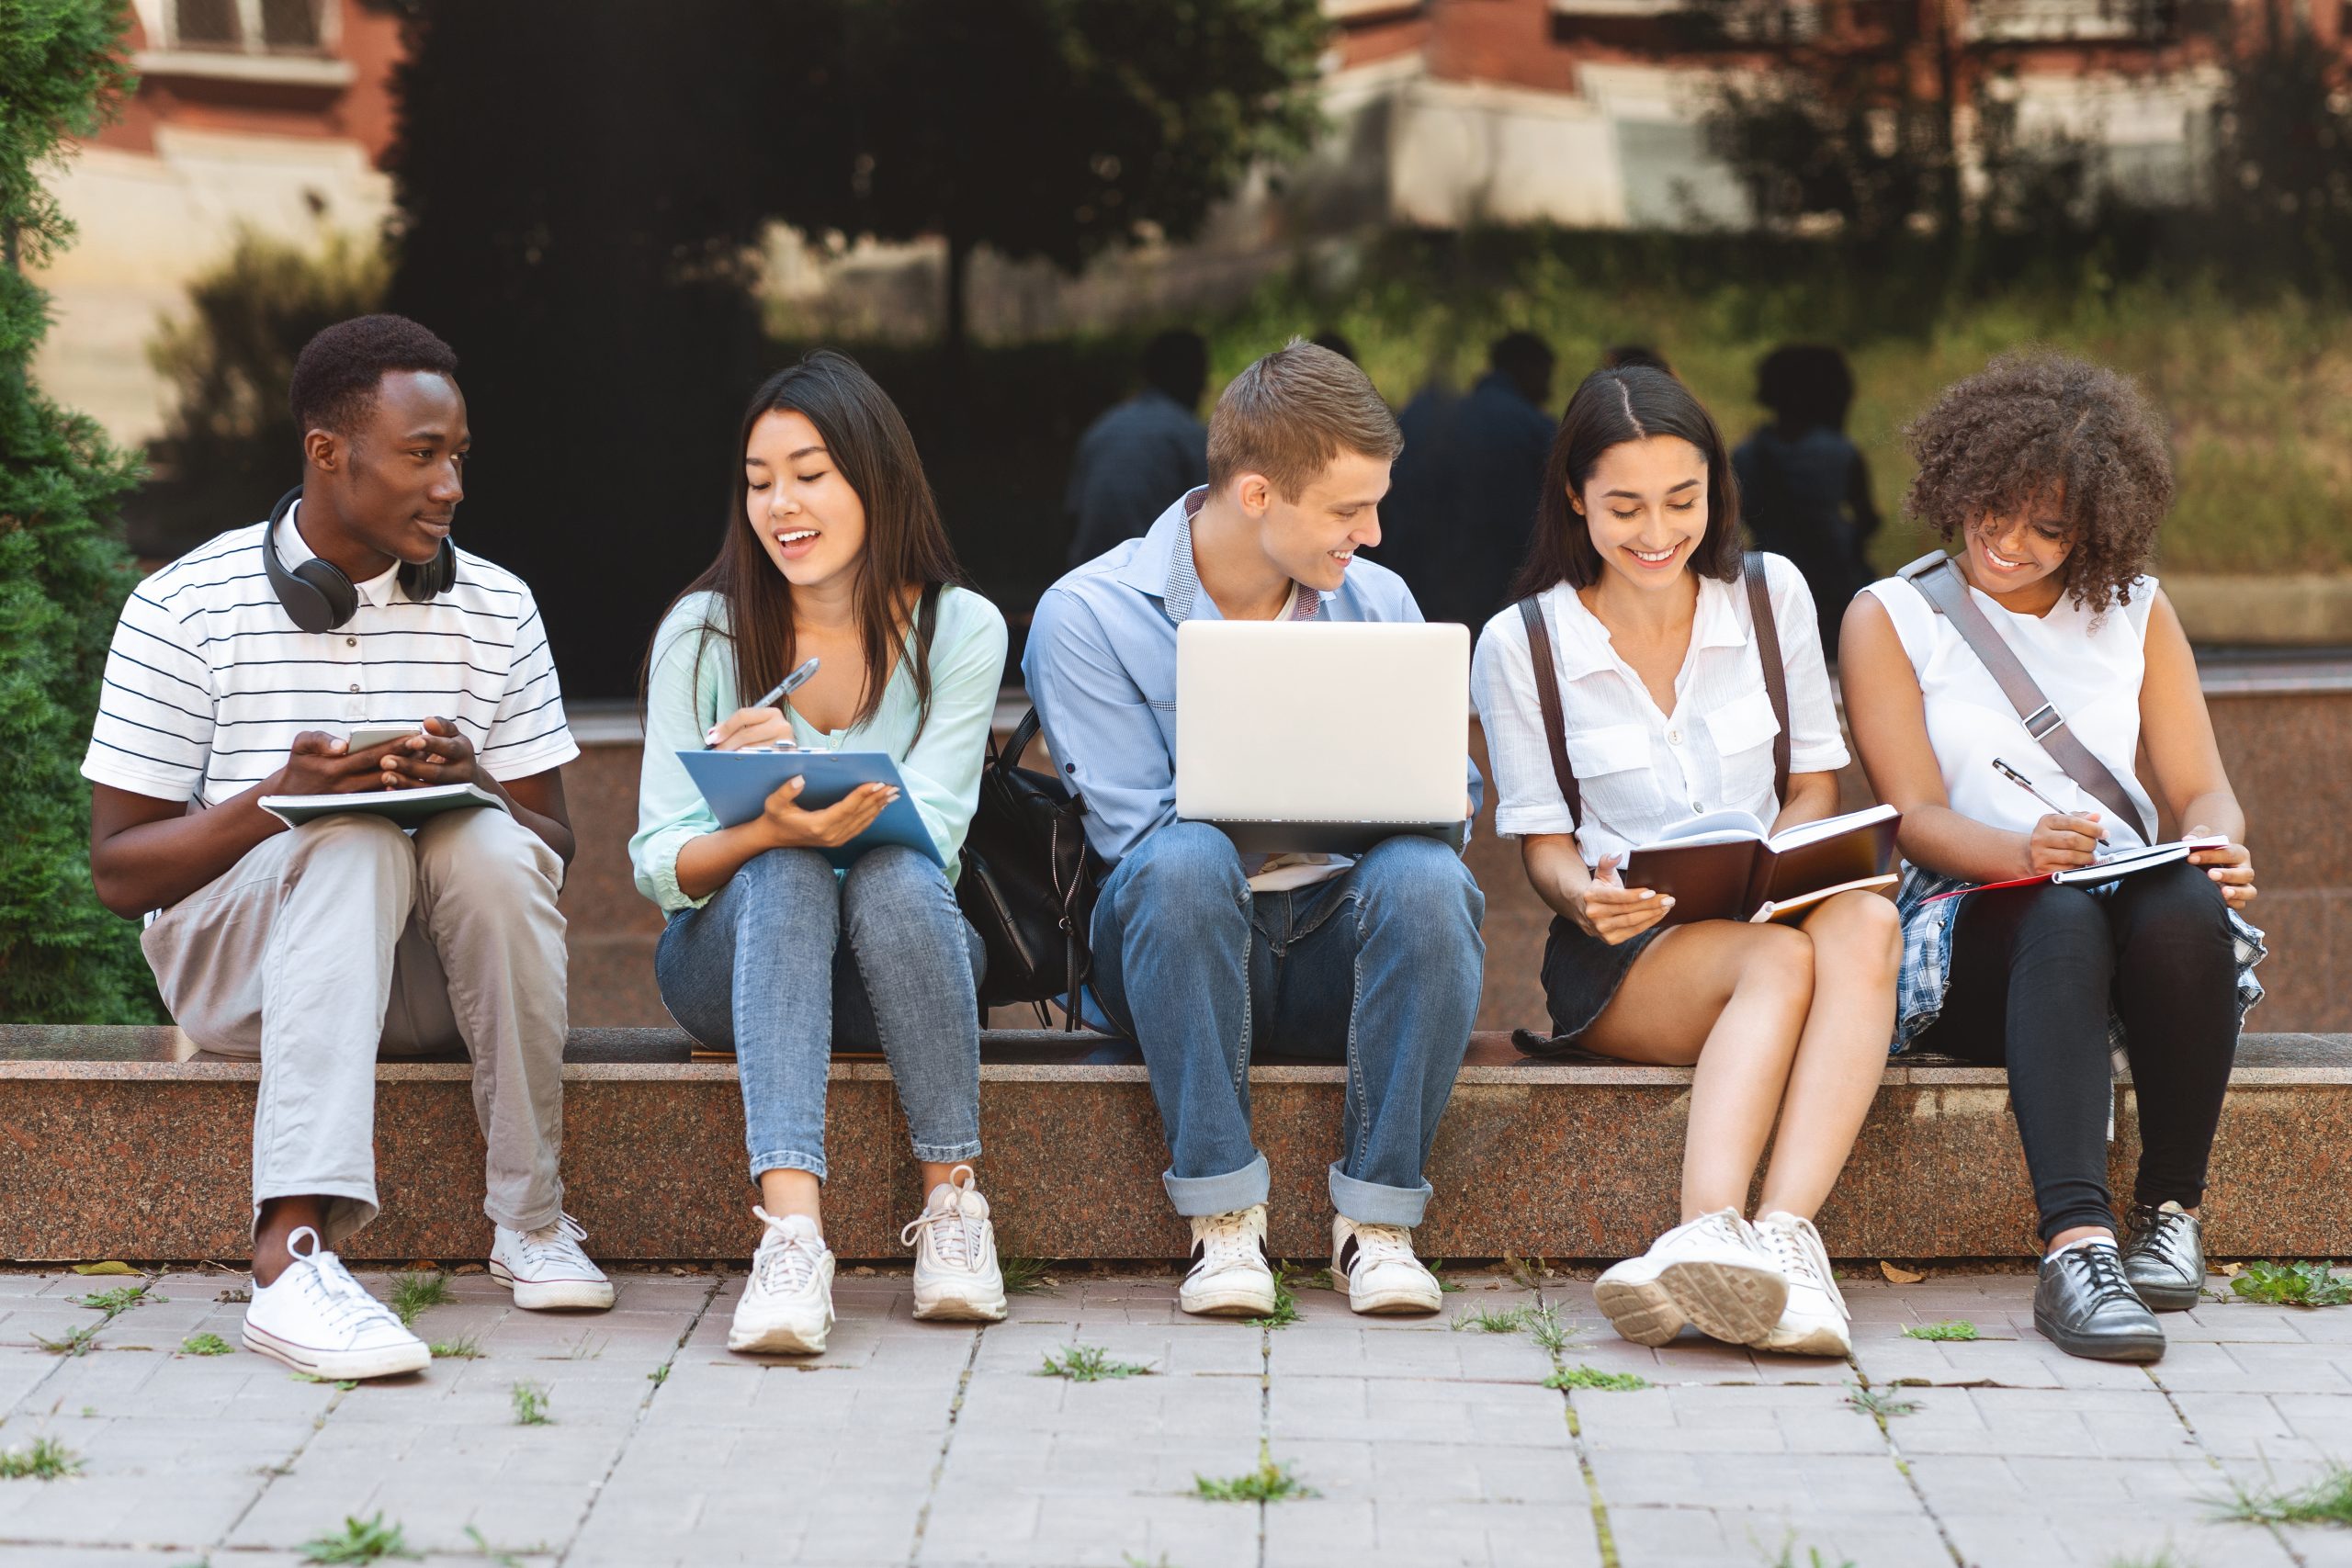 A group of teens seated on a curb, discussing with open books and laptops.